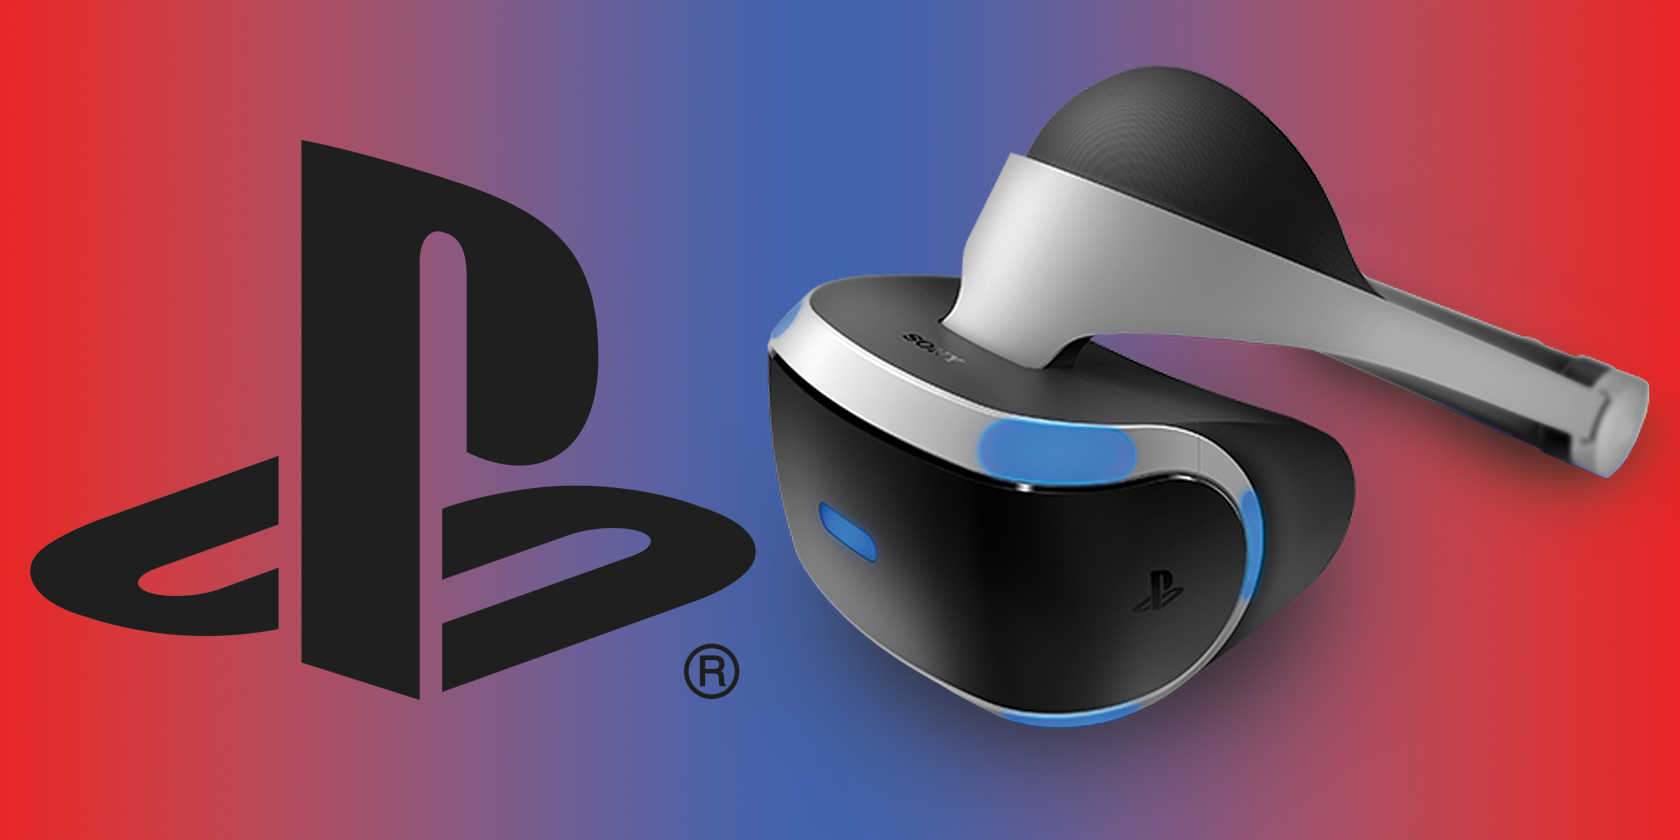 psvr headset and PS5 logo